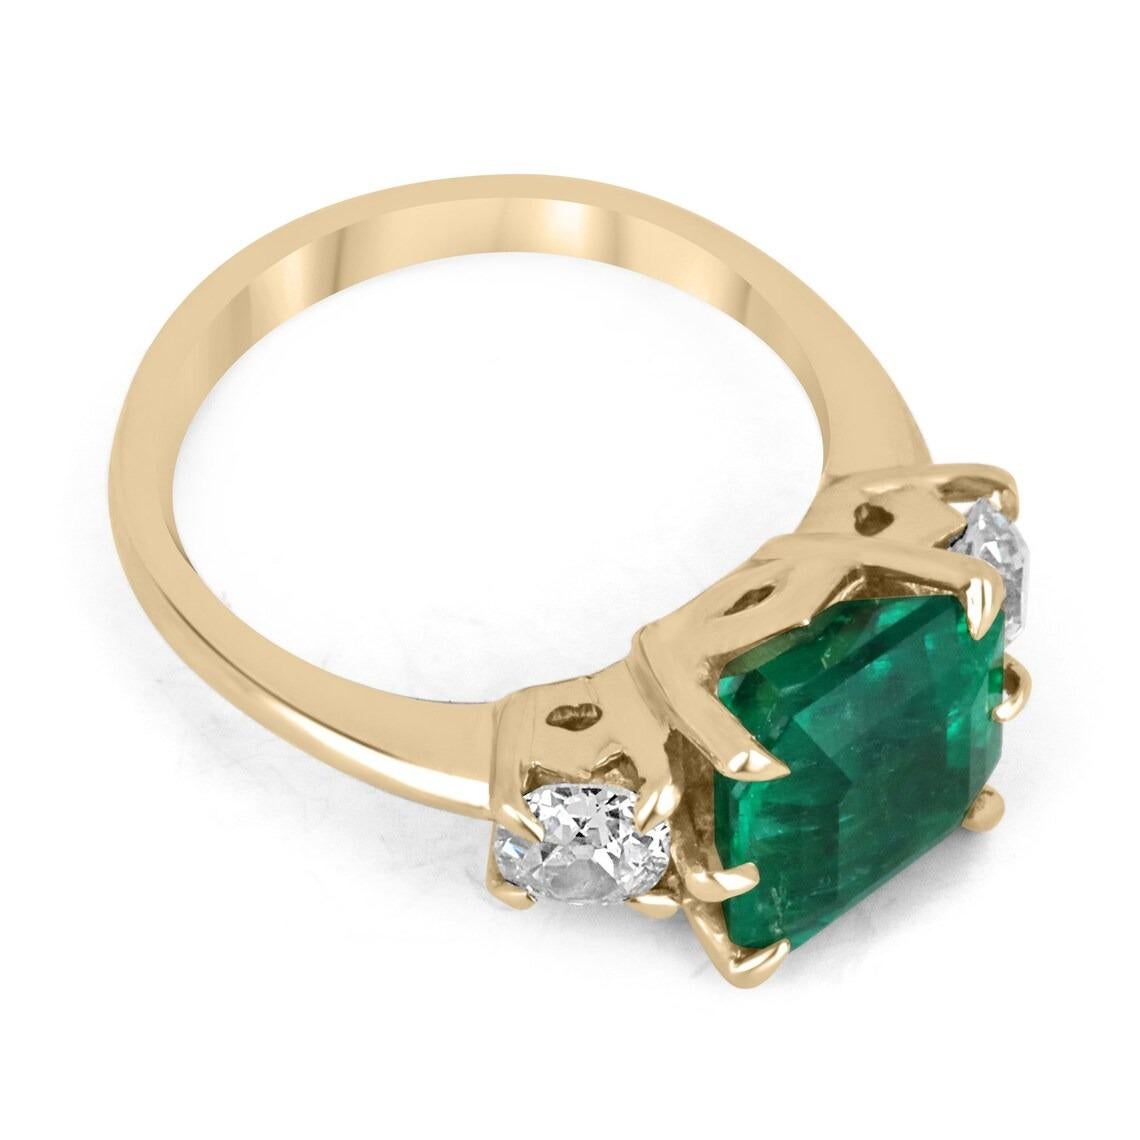 A victorian inspired Colombian emerald and old European cut diamond three-stone ring. Dexterously crafted in gleaming 18K gold this ring features a rare, 3.68-carat natural Colombian emerald-Asscher cut from the famous Muzo mines. Set in a bespoke